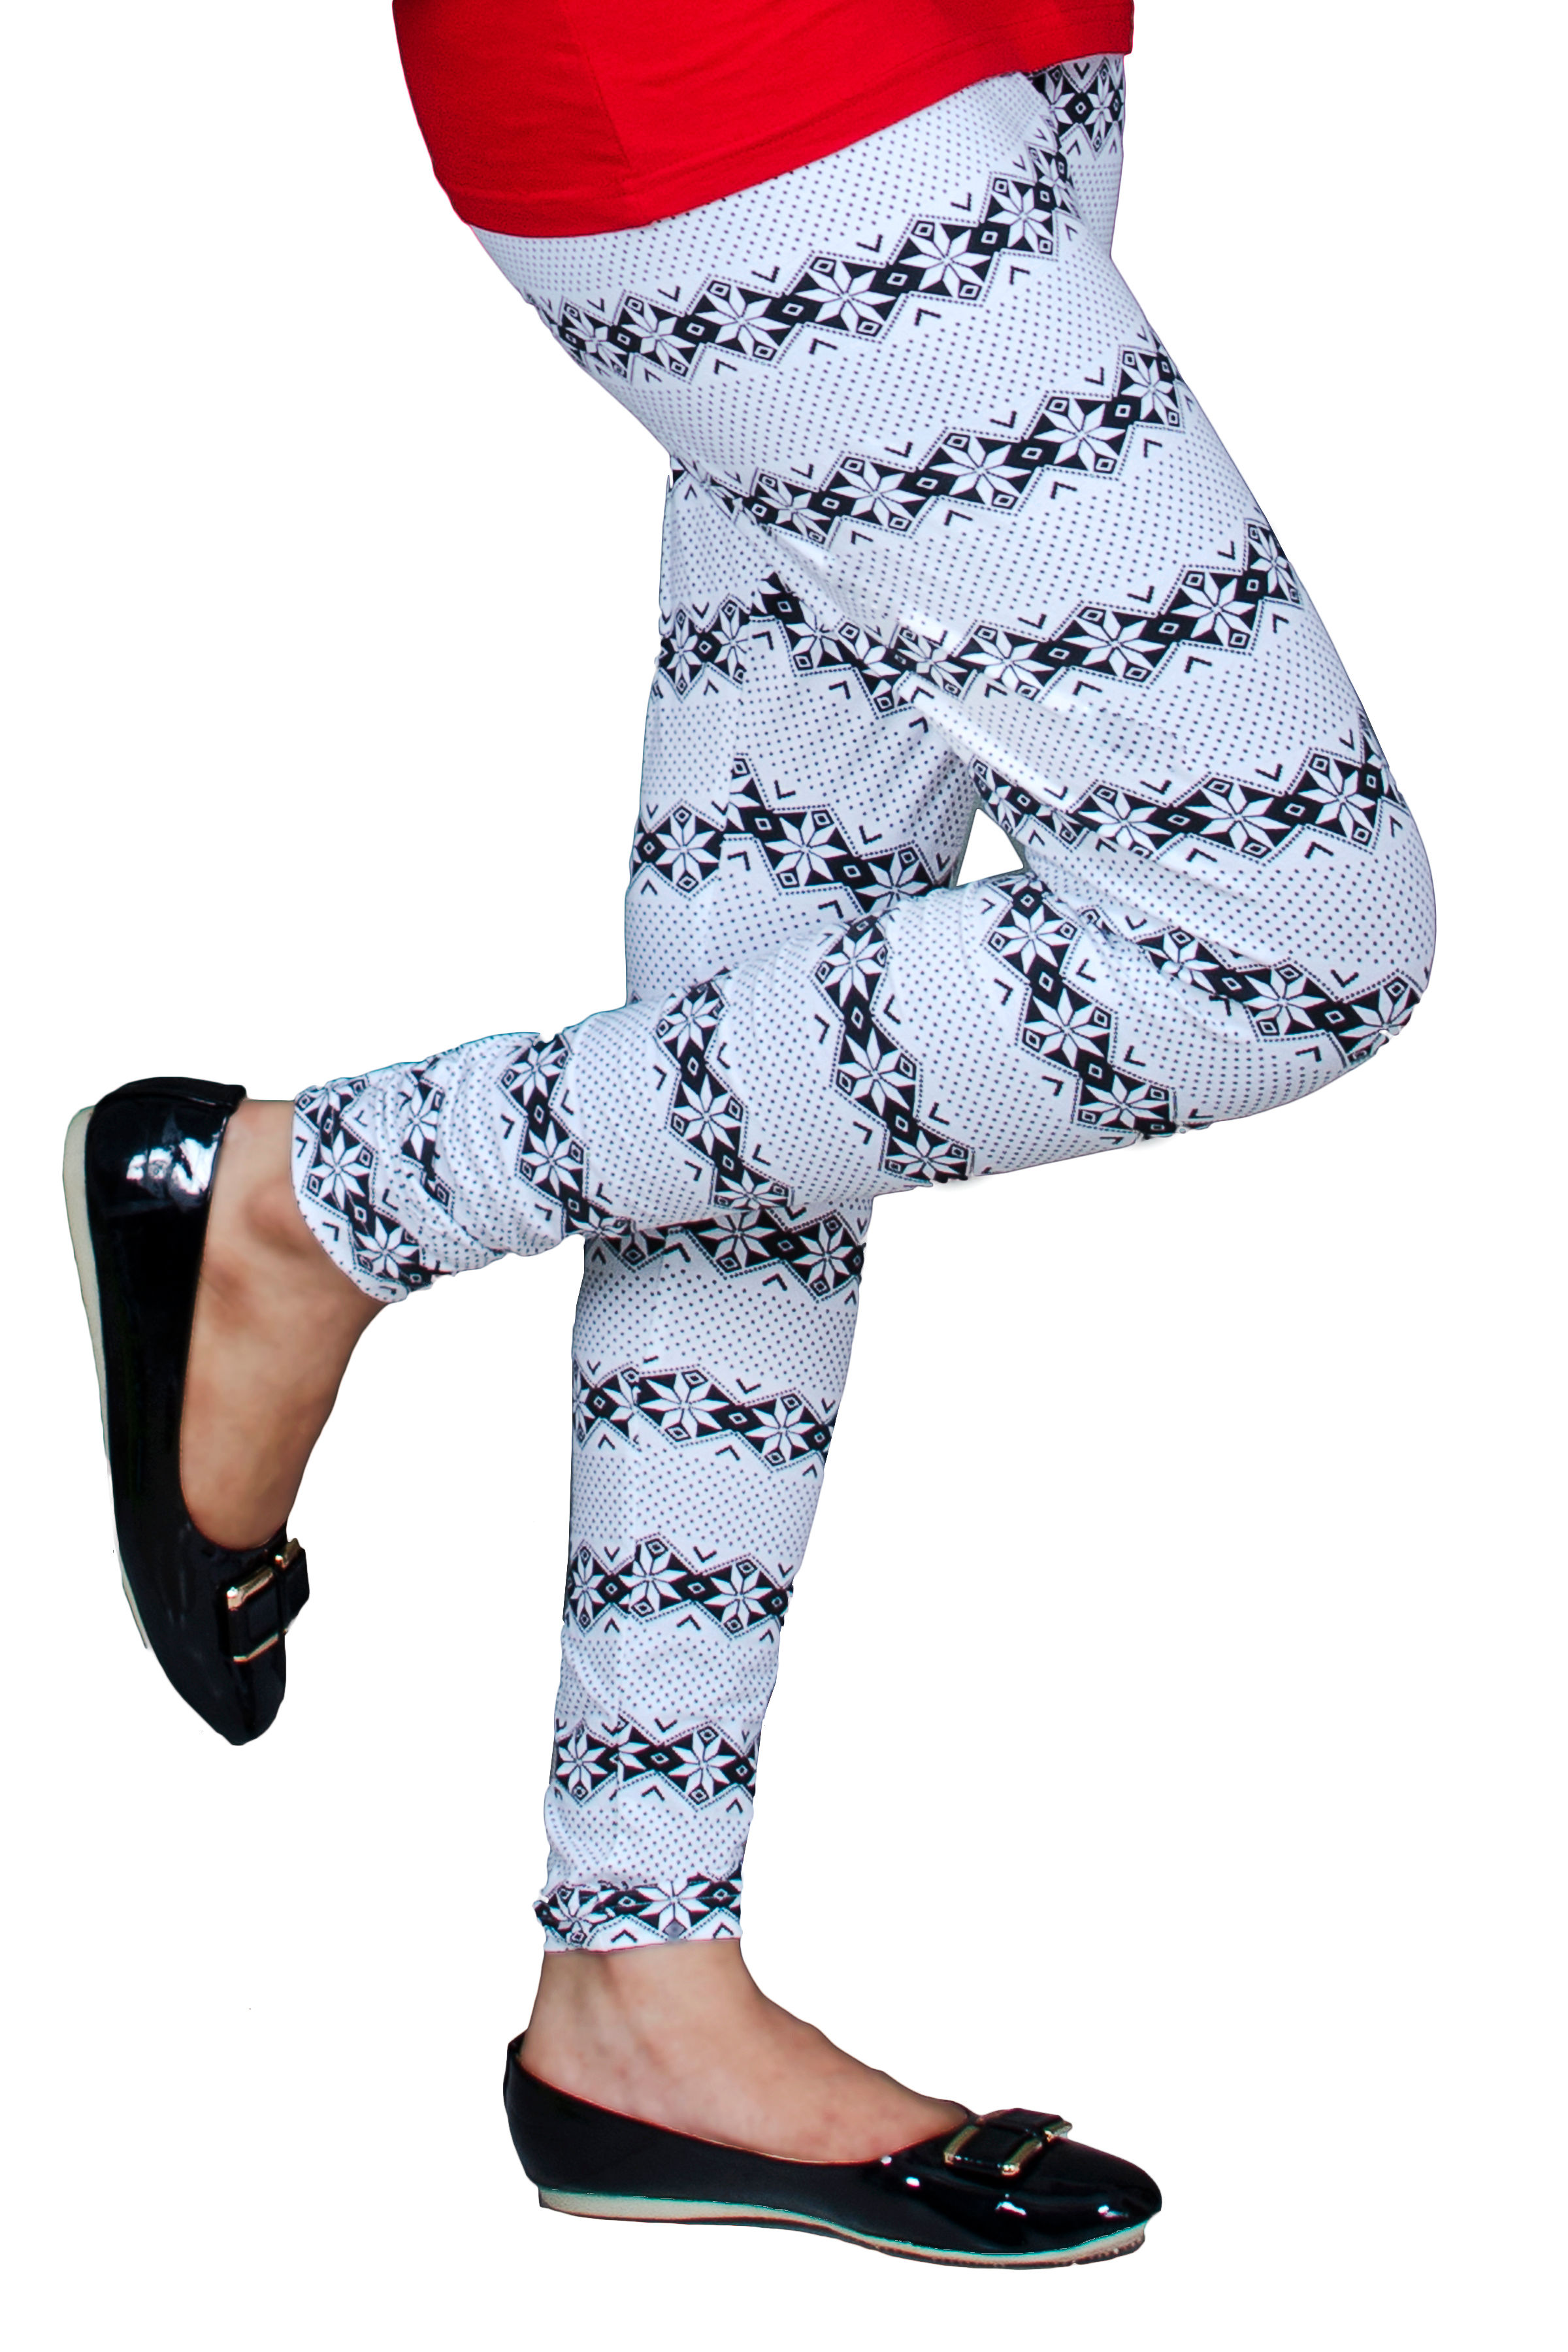 ShopOlica Footed Winter Wear Legging Price in India - Buy